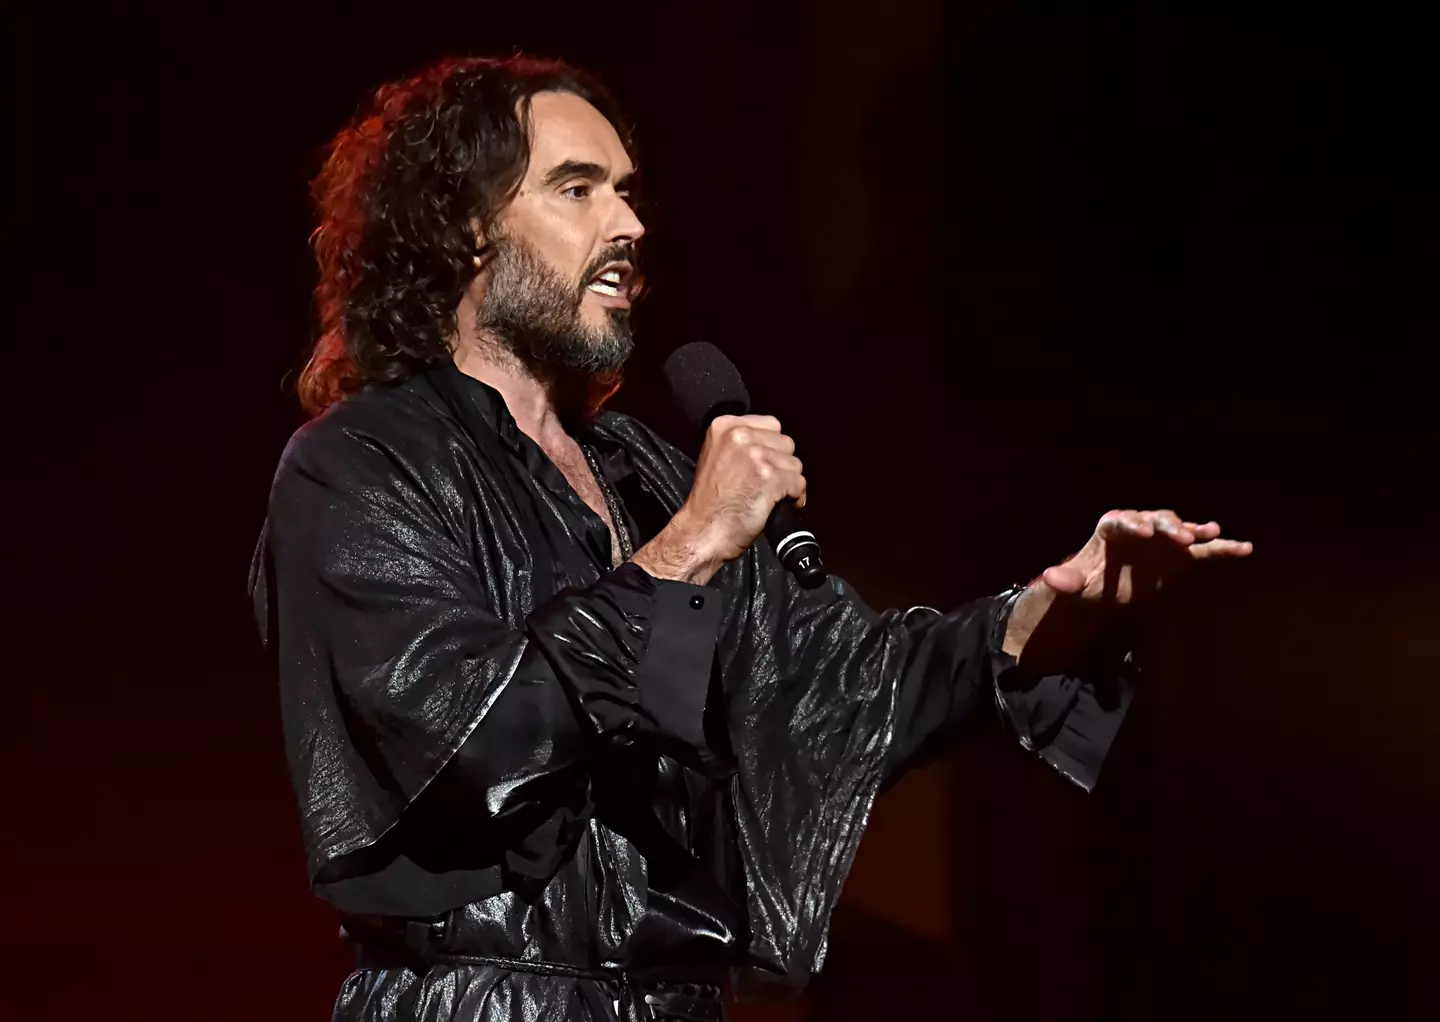 Russell Brand began his career as a comedian.